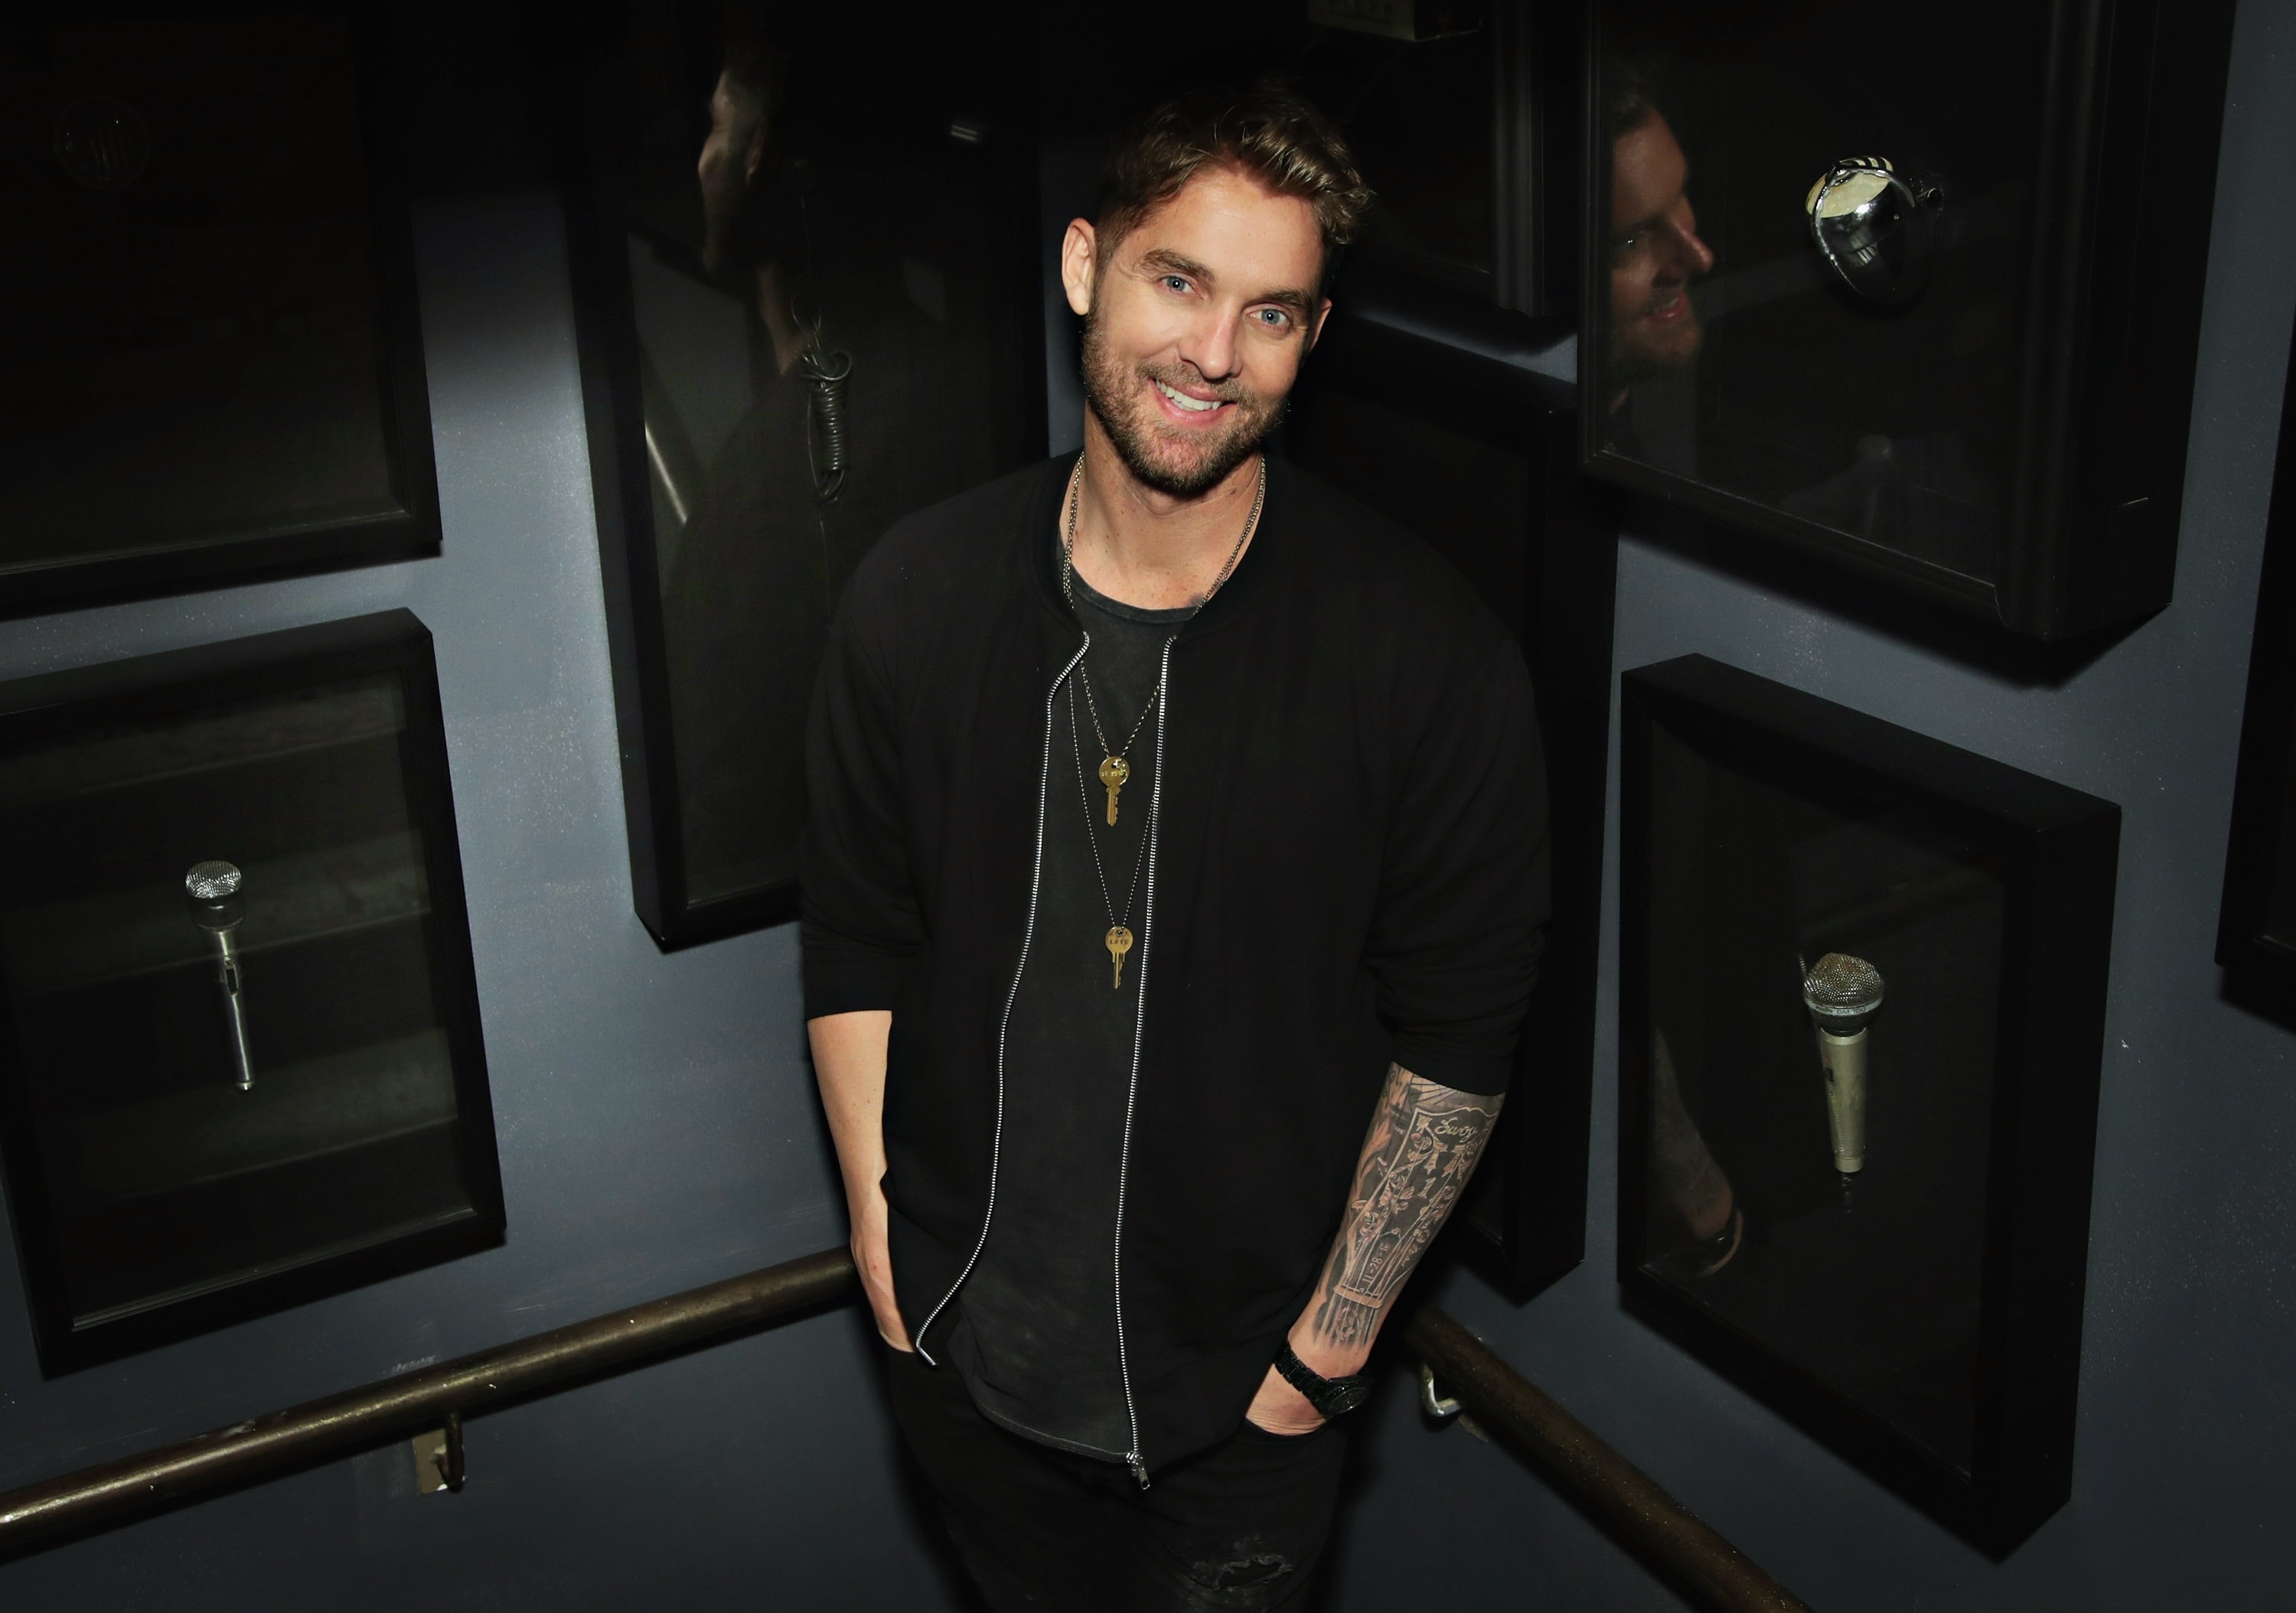 Brett Young, Meaning behind his name, Personal connection, Family influence, 3000x2110 HD Desktop